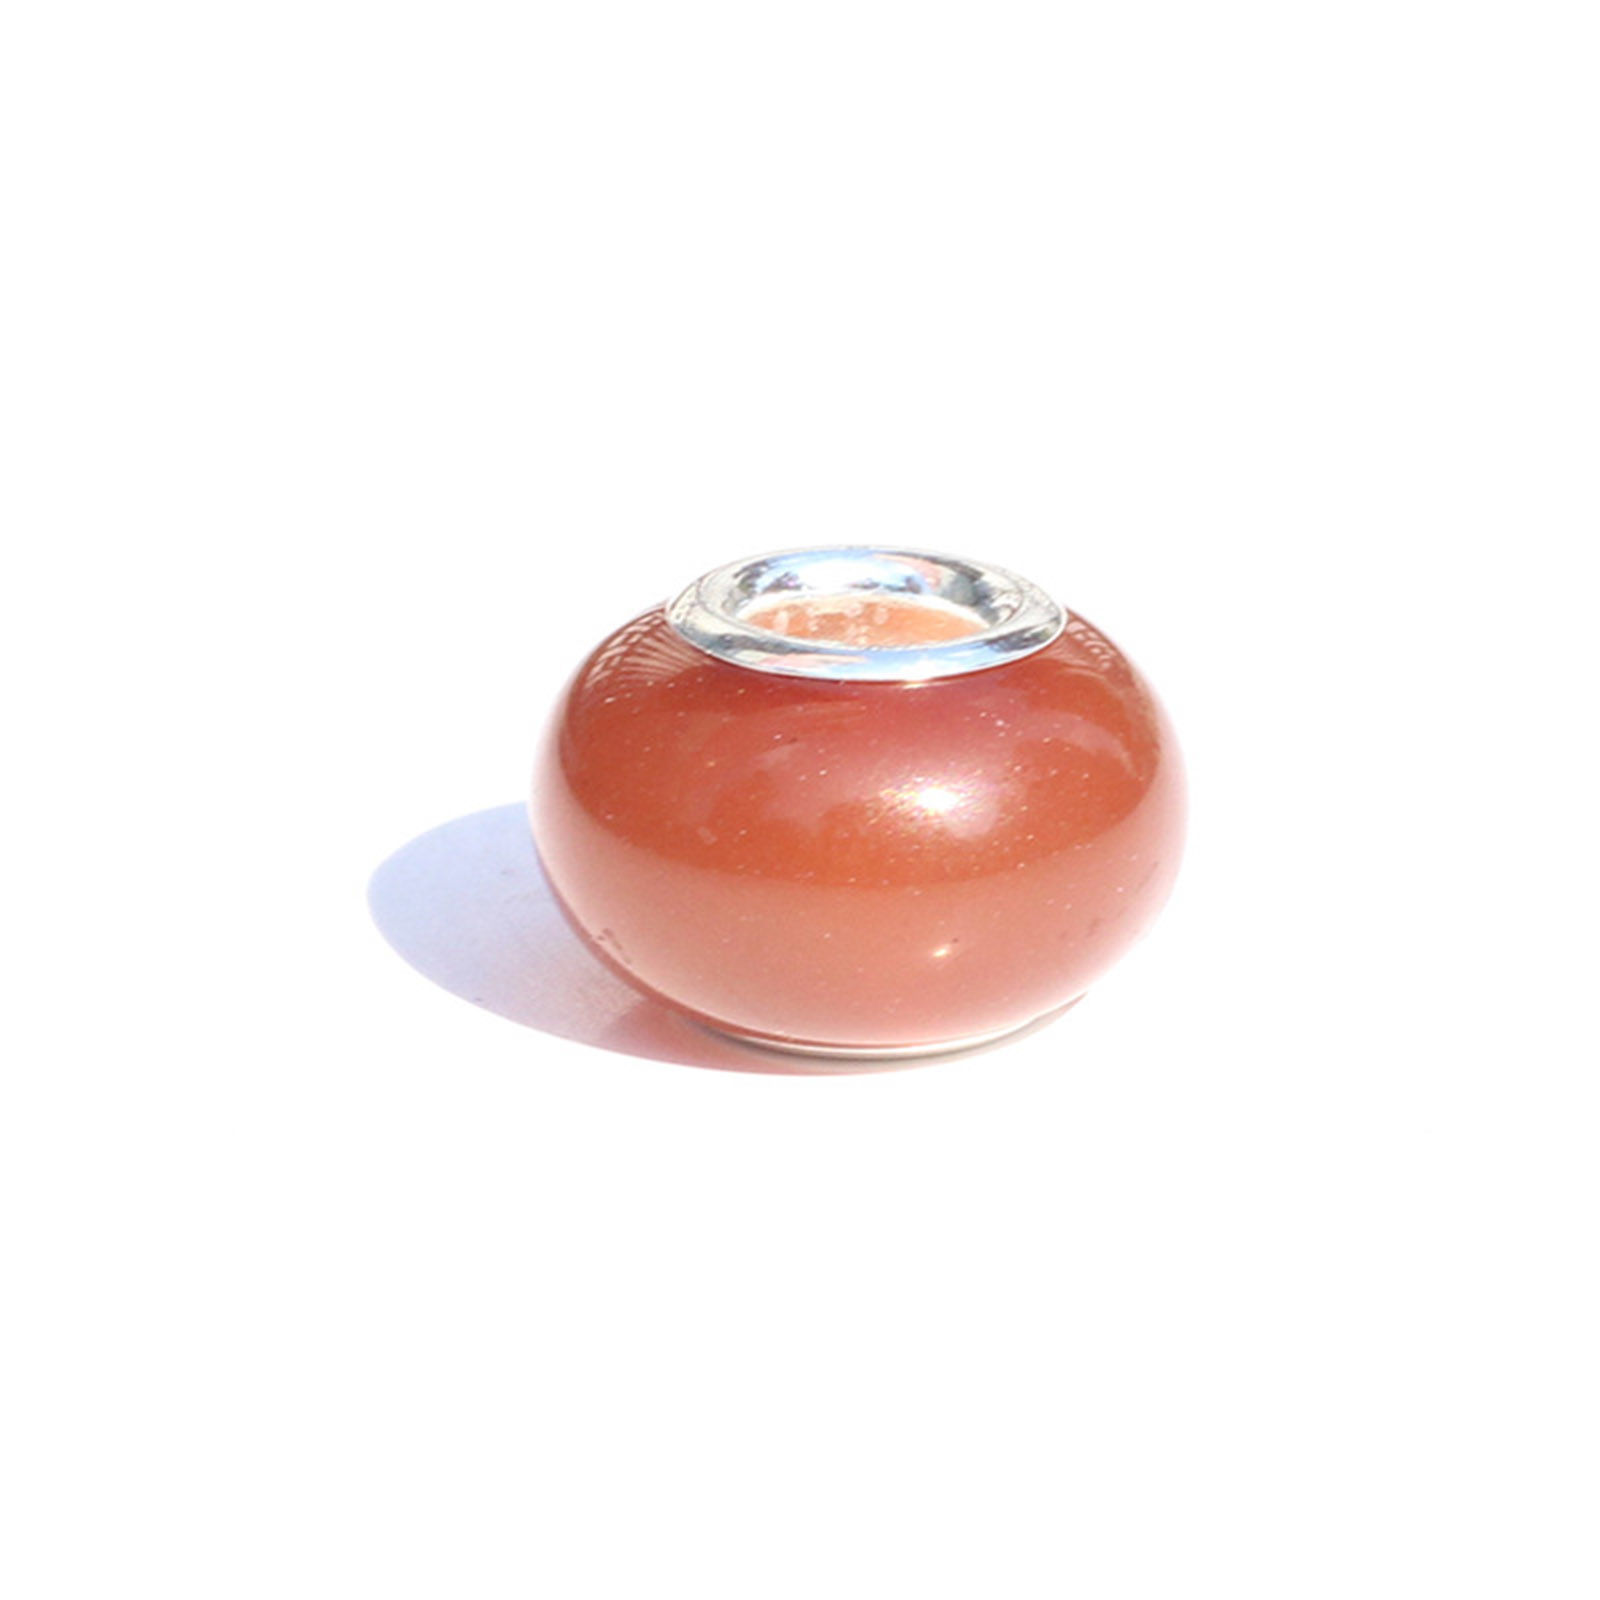 Picture of Resin European Style Large Hole Charm Beads Orange-red Round Glow In The Dark Luminous 14mm x 9mm, Hole: Approx 5mm, 20 PCs